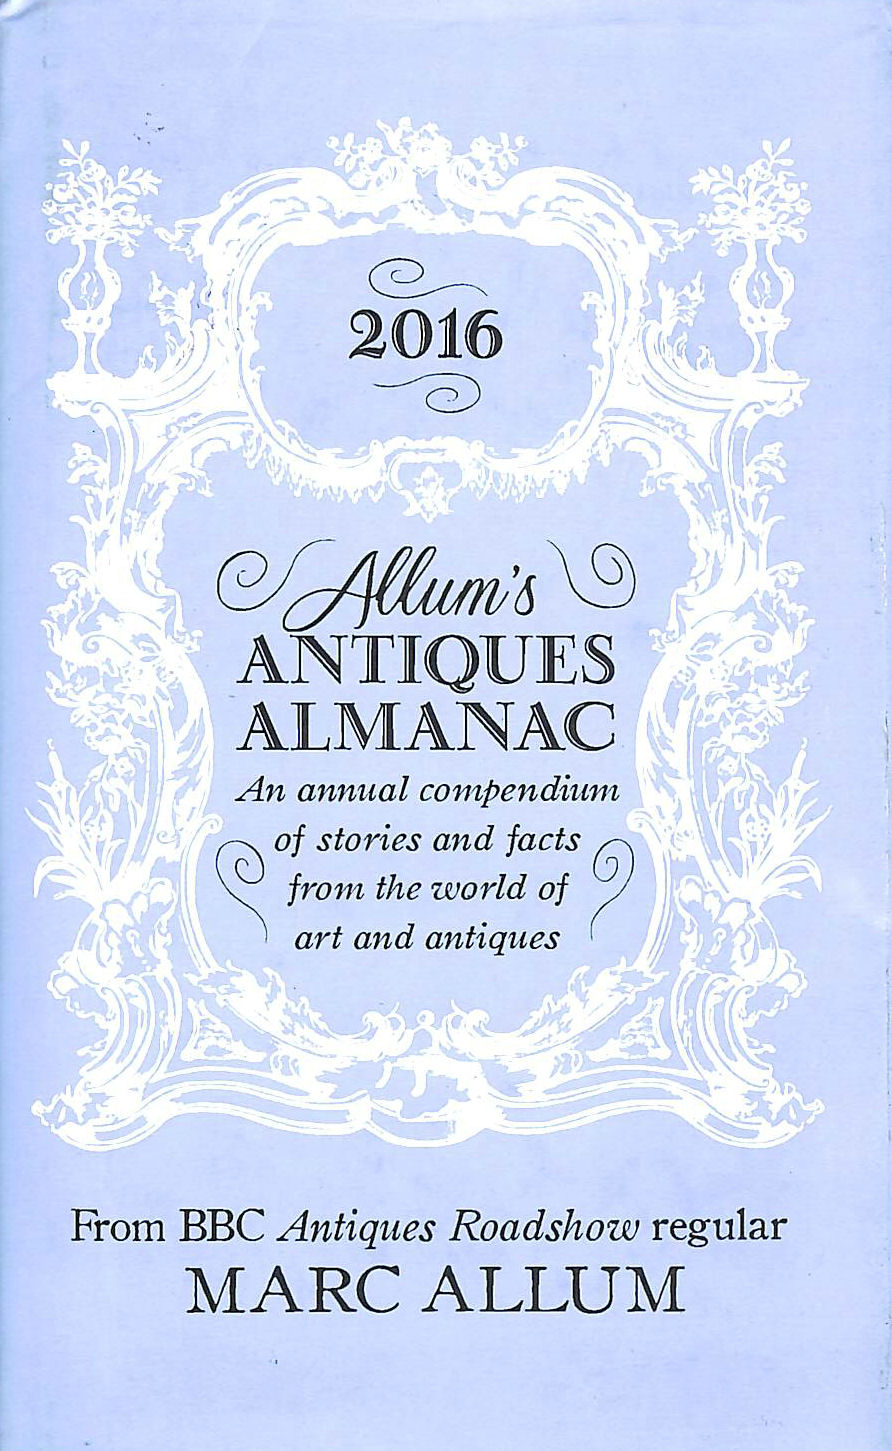 ALLUM, MARC - Allum's Antiques Almanac 2016: An Annual Compendium of Stories and Facts From the World of Art and Antiques